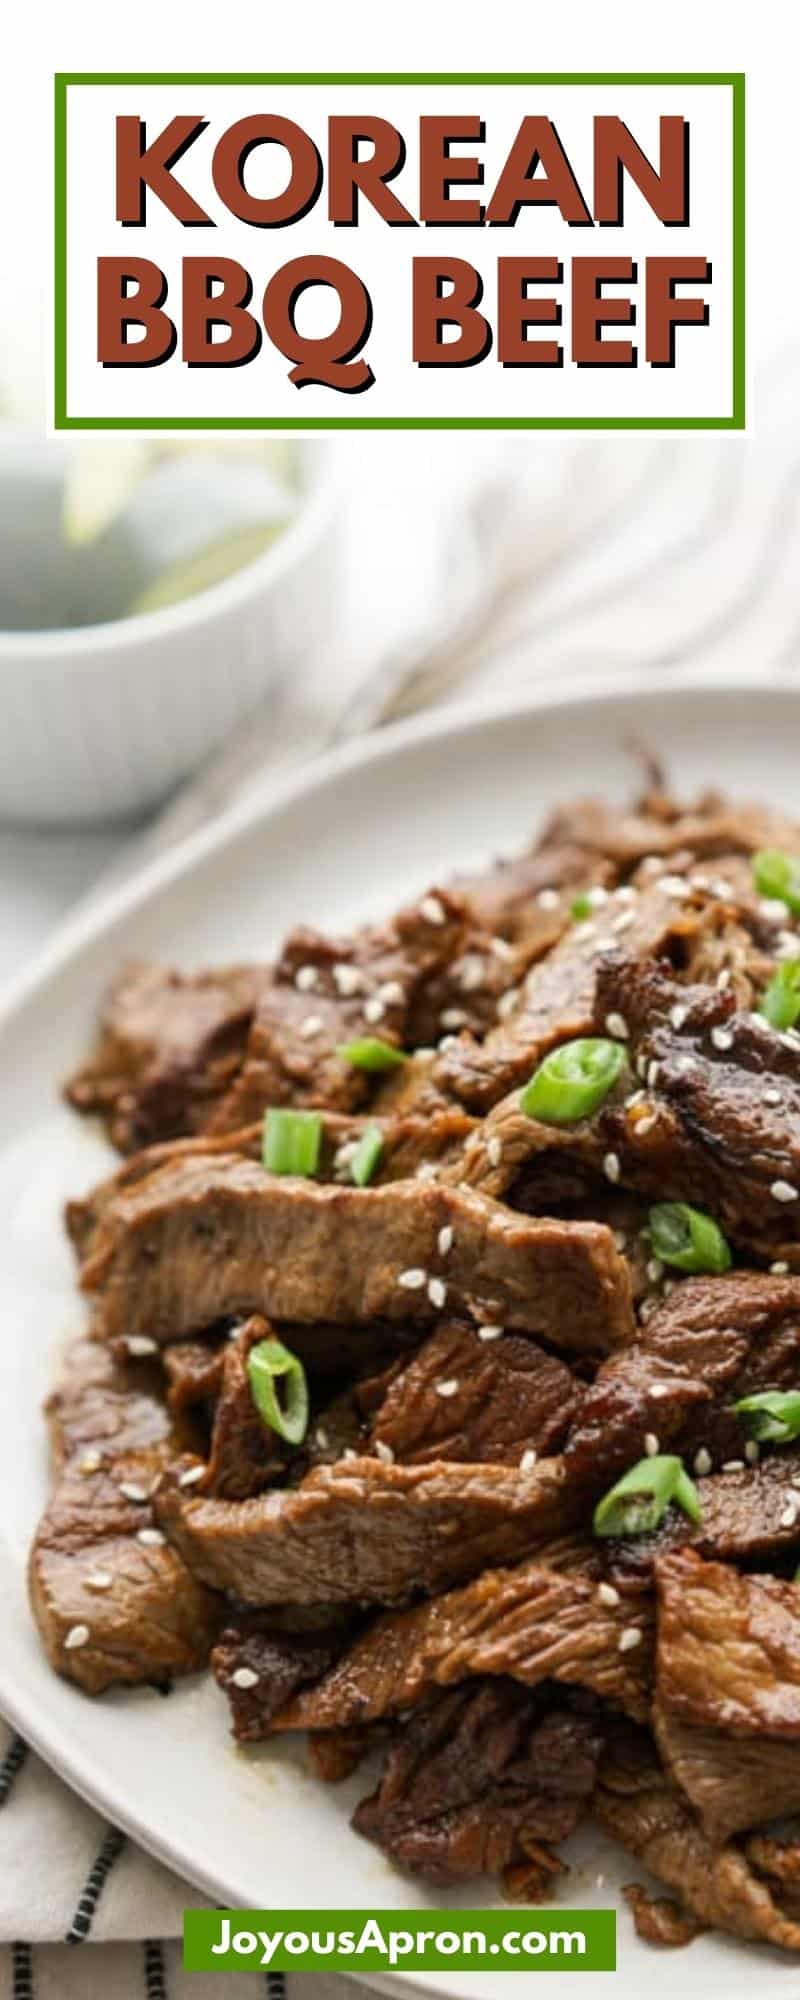 Bulgogi Beef (Korean BBQ Beef) - Beef marinated in Asian / Korean sauce, then grilled or panfried to perfection. Tender and so flavorful! A delicious Korean dish that serves well with rice and veggies via @joyousapron